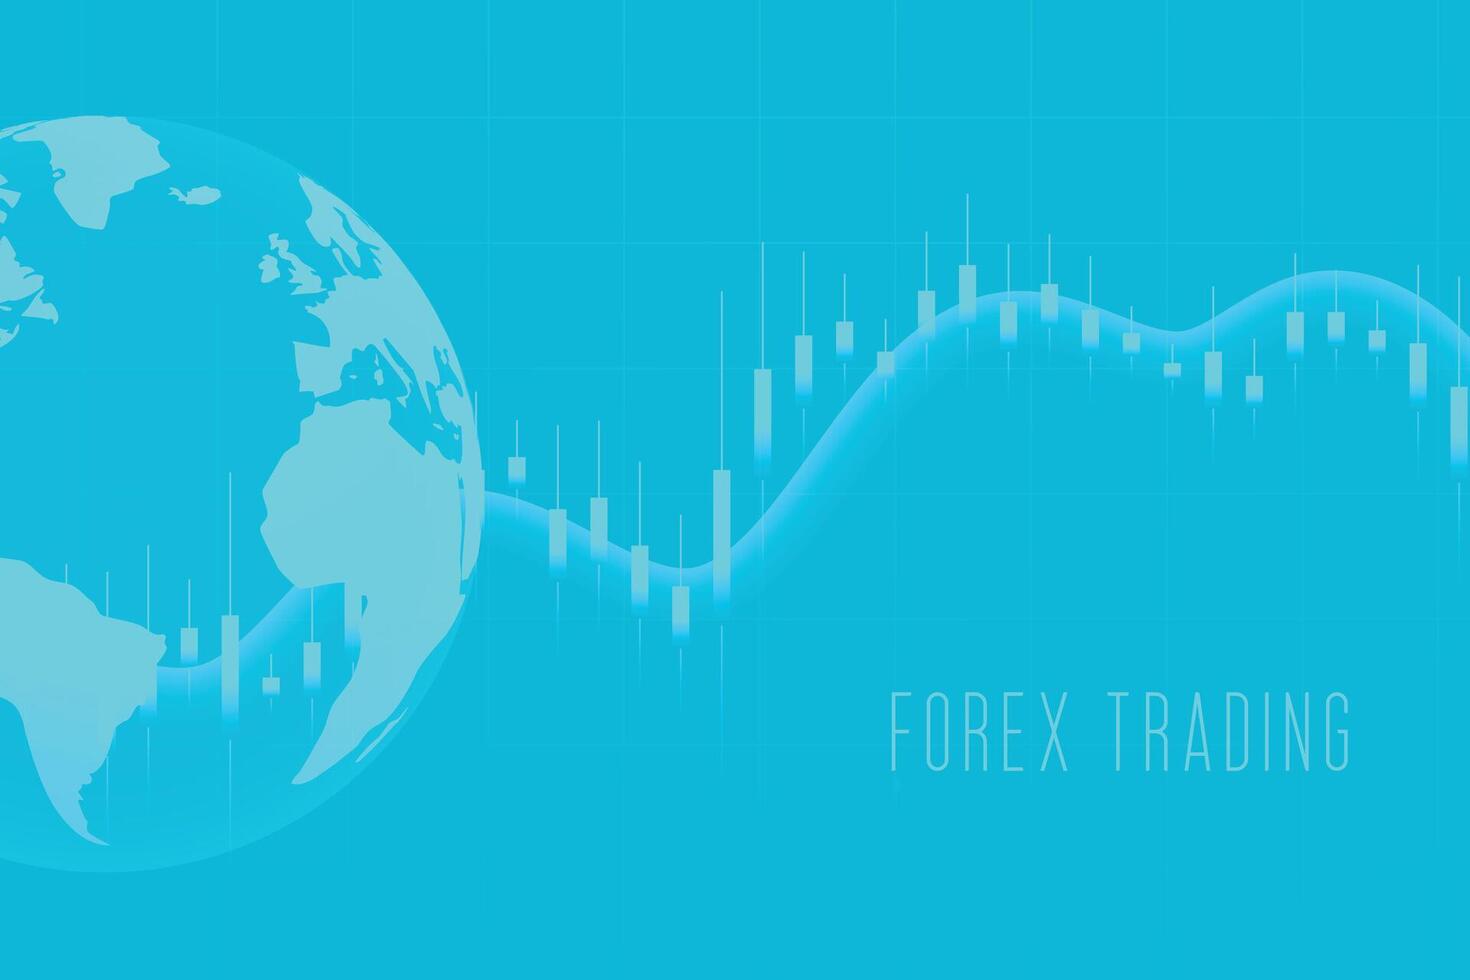 global forex stock market trading blue background vector